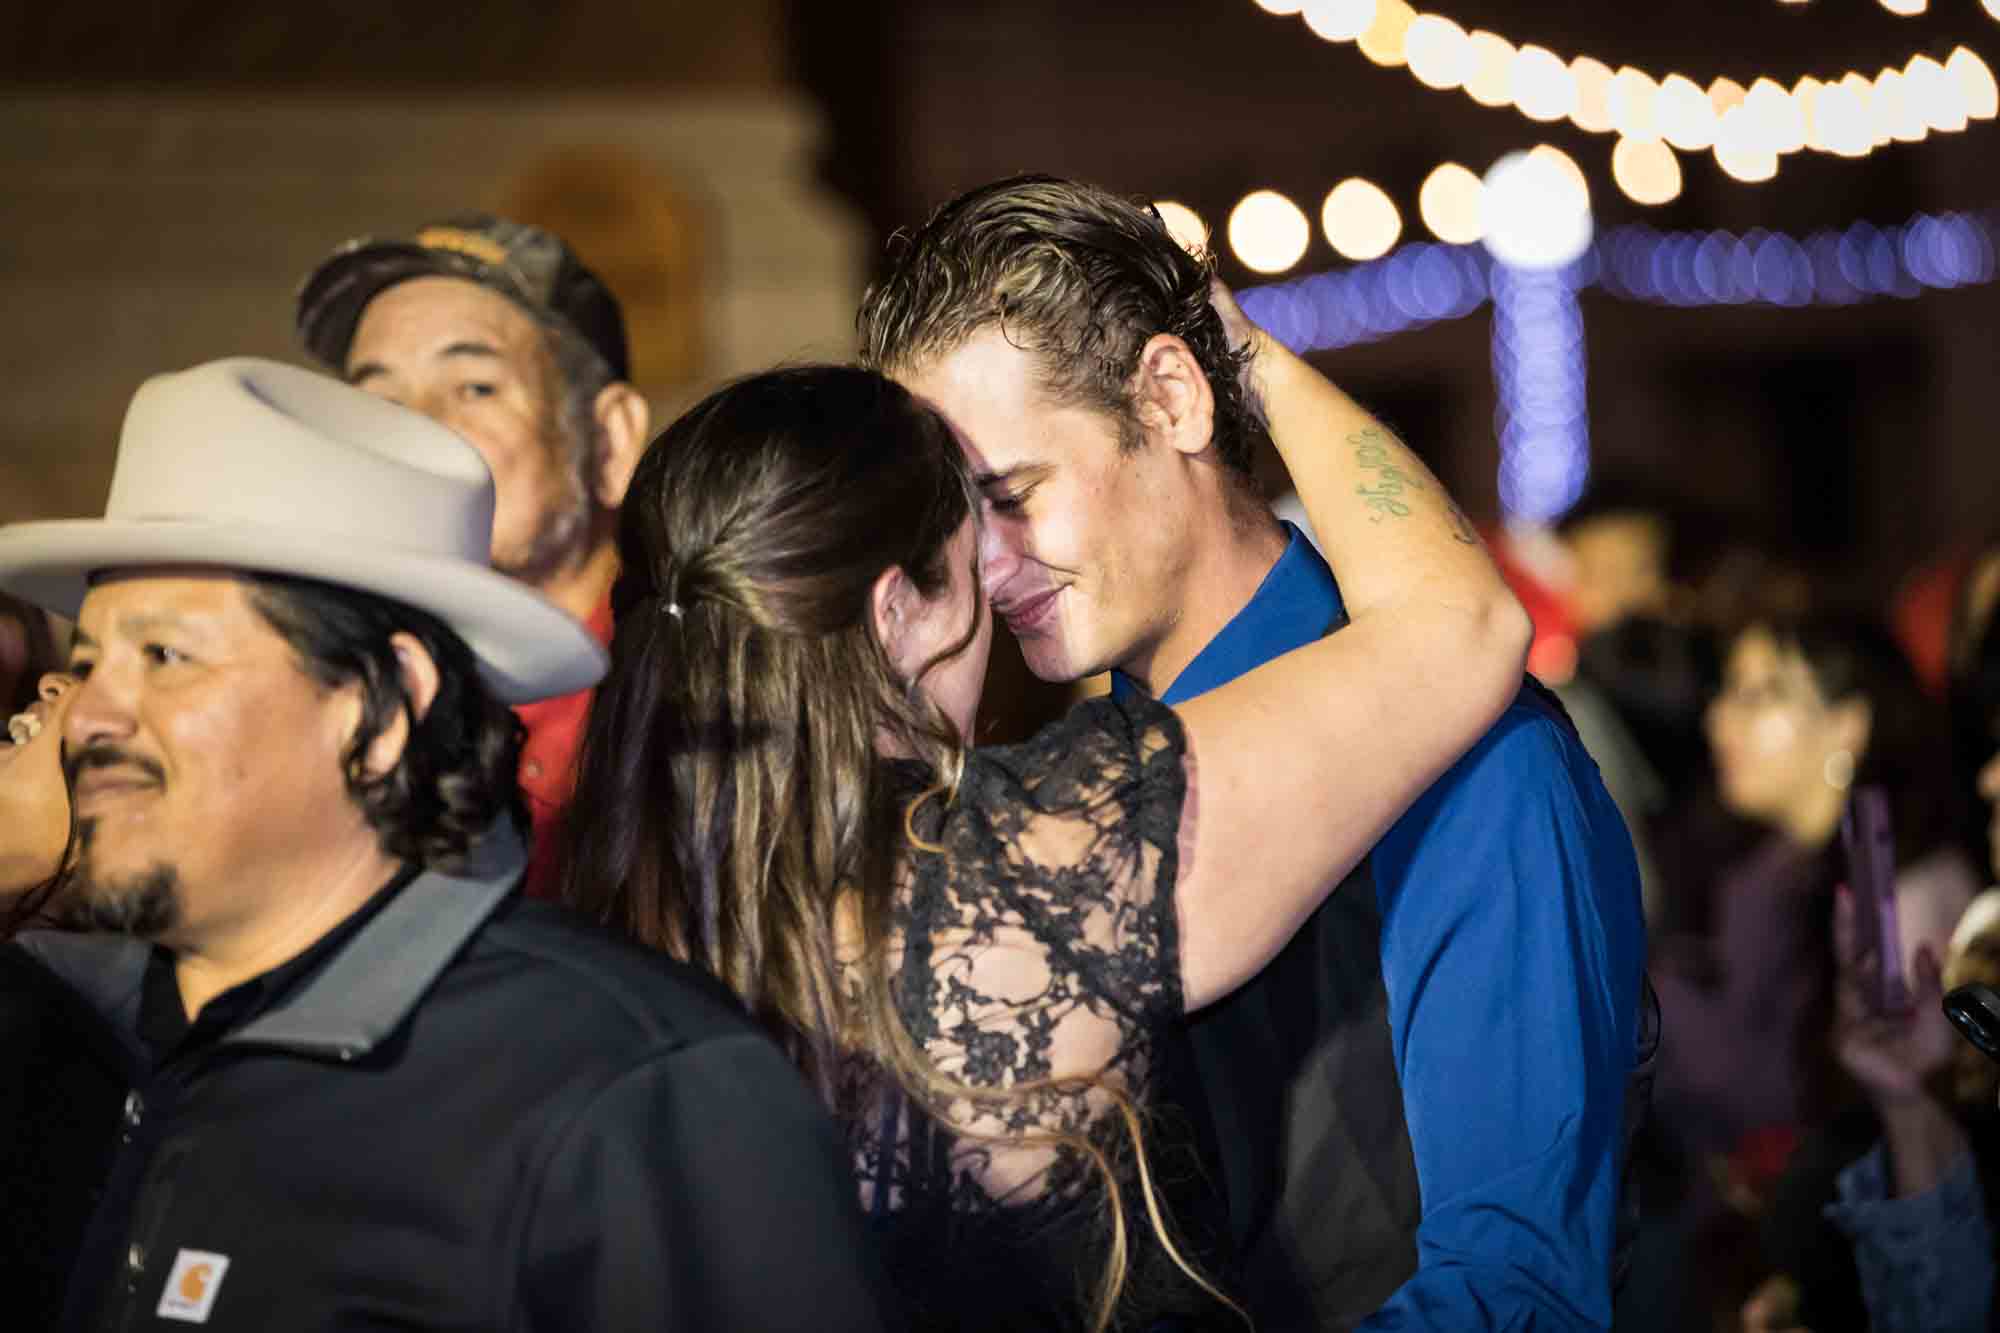 Woman wearing black dress dancing with man wearing blue shirt in crowd at night for an article on the Bexar county mass wedding event